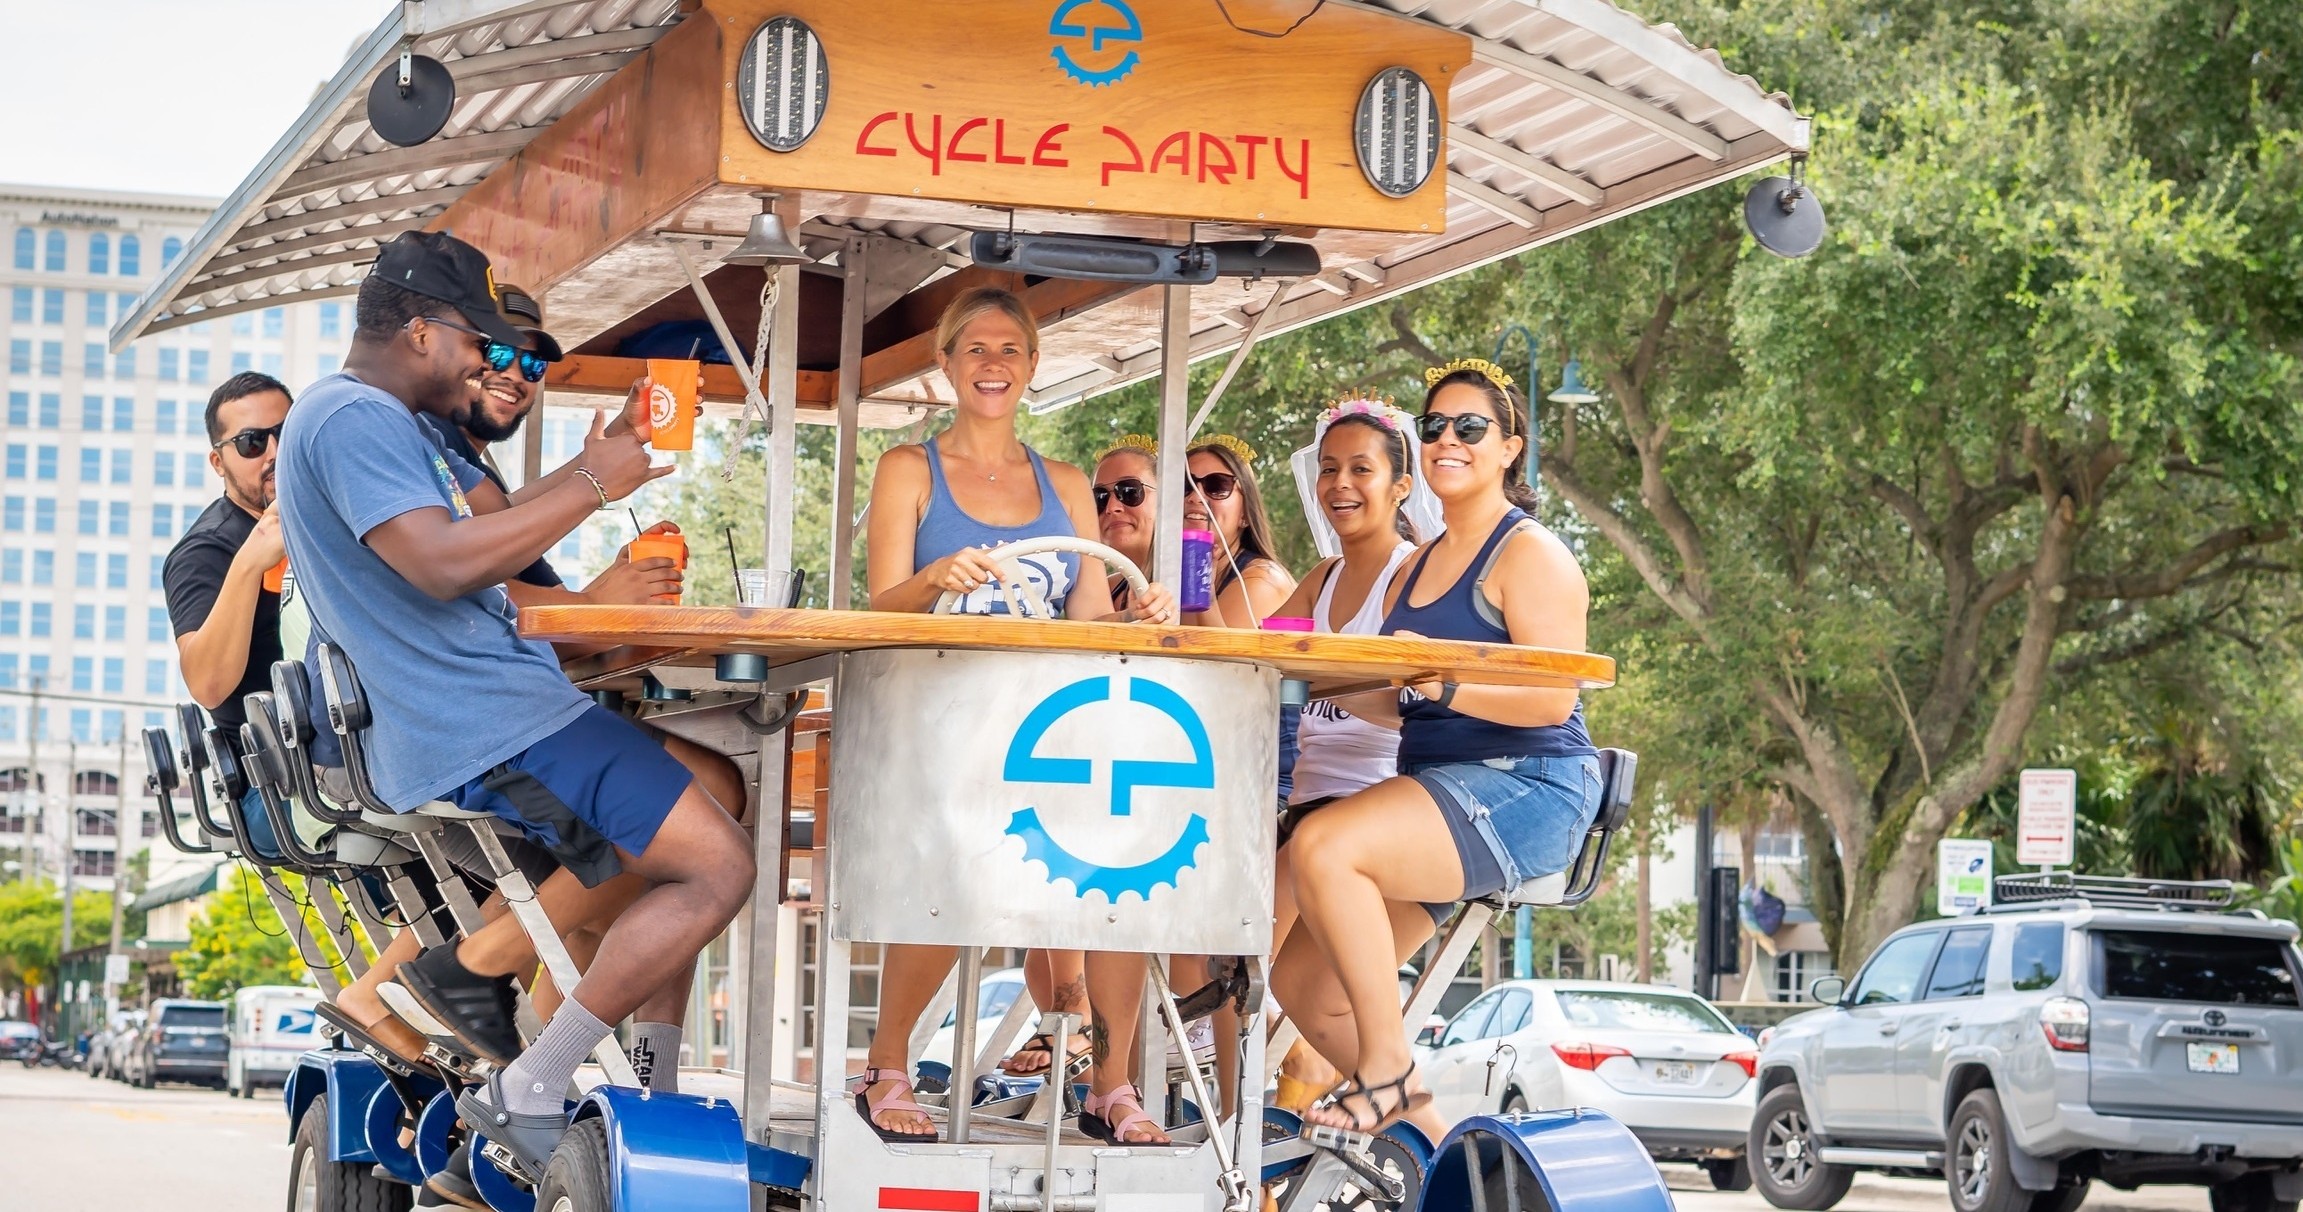 Thumbnail image for Cycle Party: Las Olas Bar Crawl on Fort Lauderdale's Top Party Bike